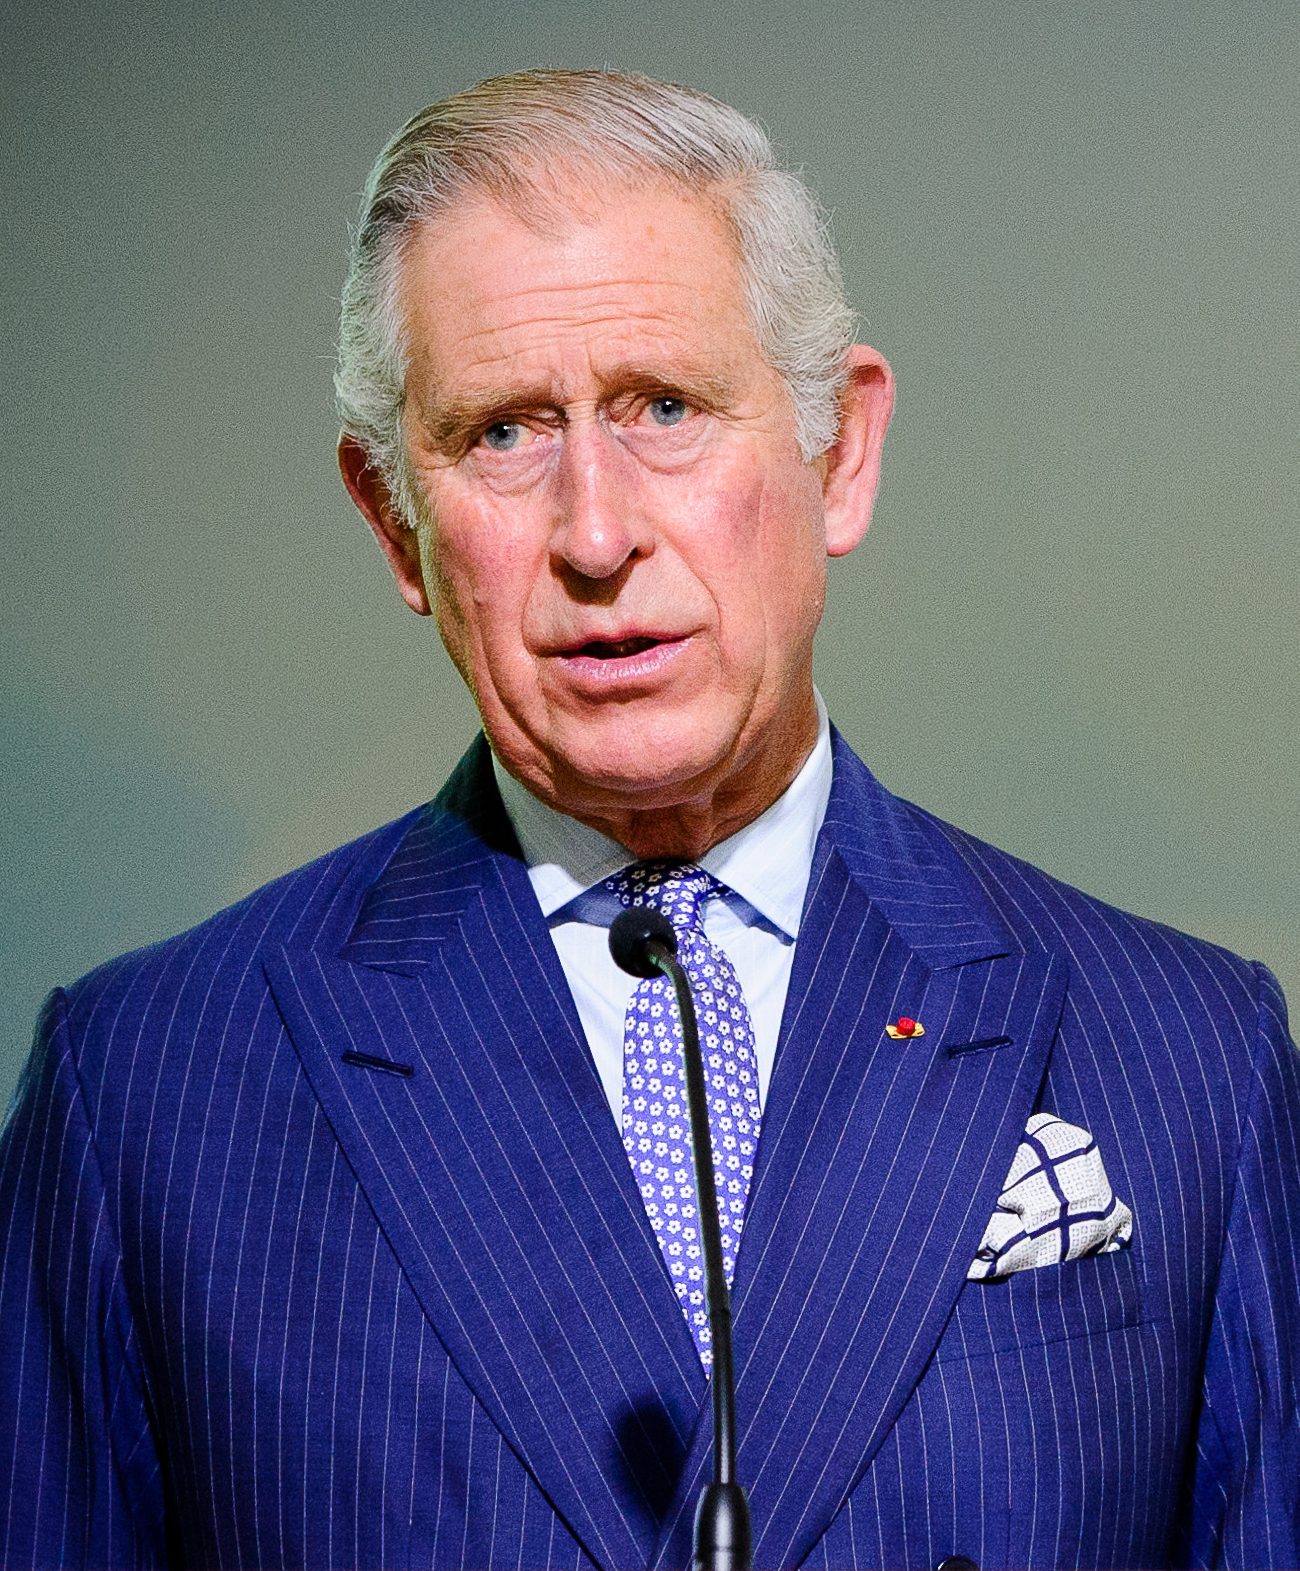 In a partnership with streaming behemoth Amazon Prime, Prince Charles creates a climate change TV channel.